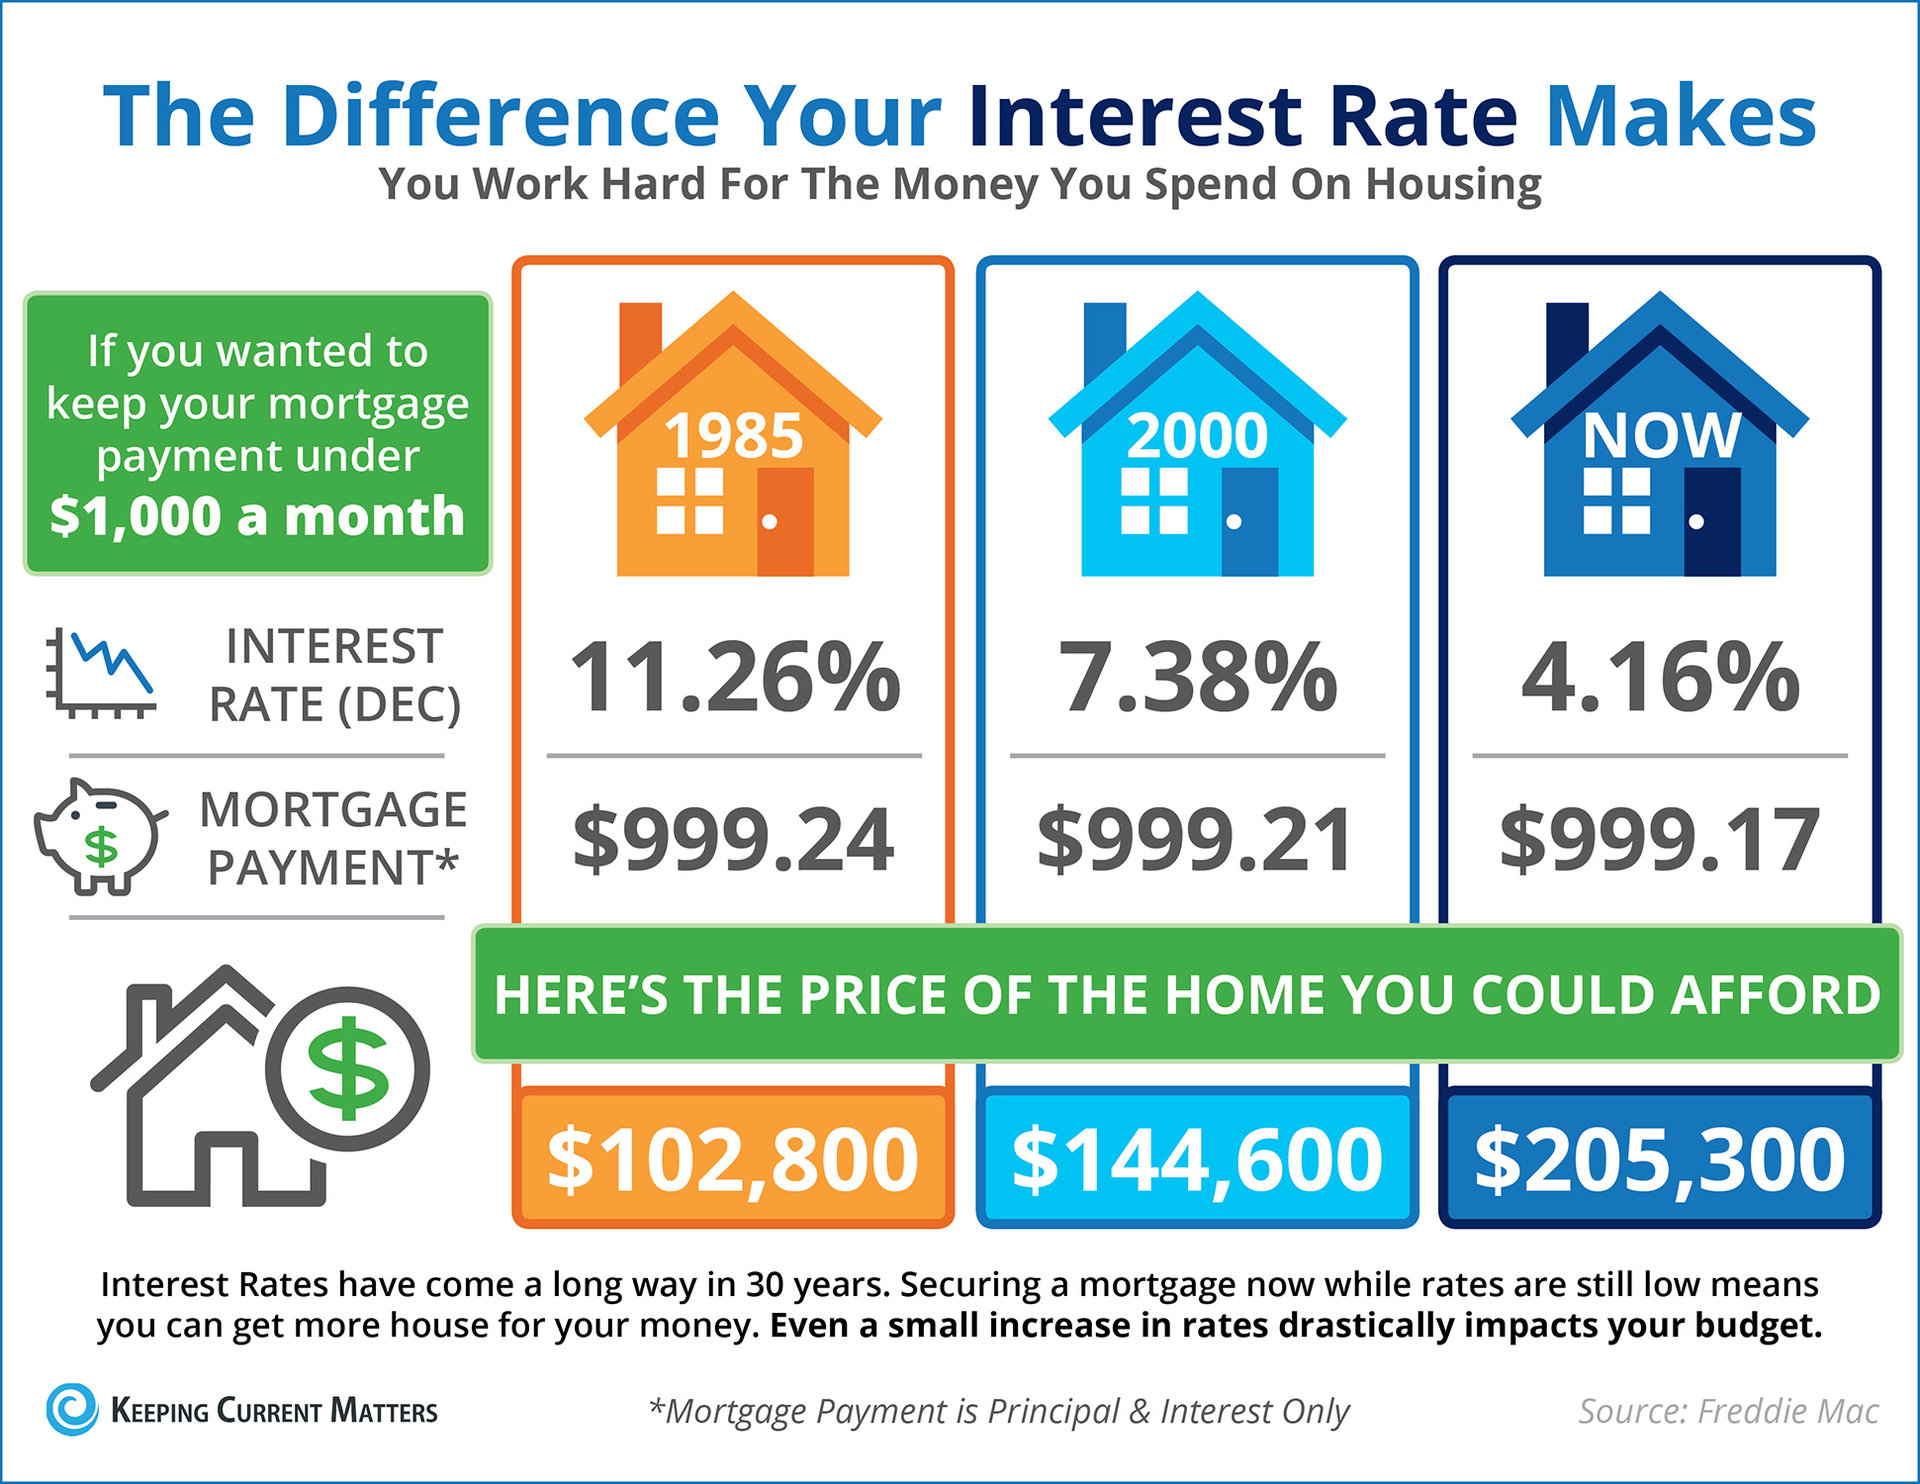 The Impact Your Interest Rate Has on Your Buying Power